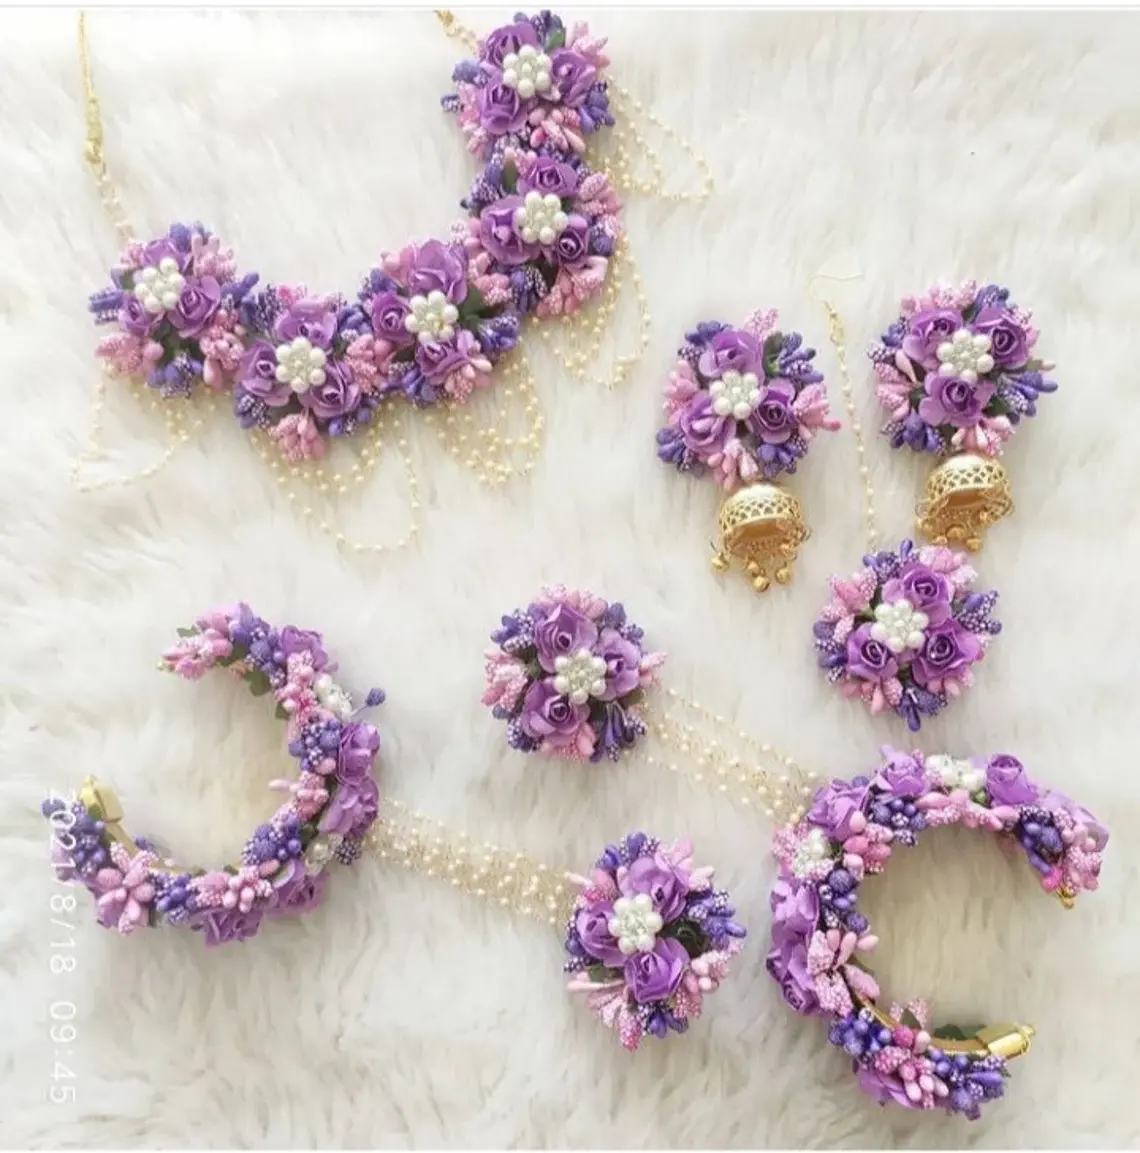 Floral Purple And Pink Jewelry Set For Brides And Bridesmaid | Handmade Artificial Floral Jewelry For Haldi Function India